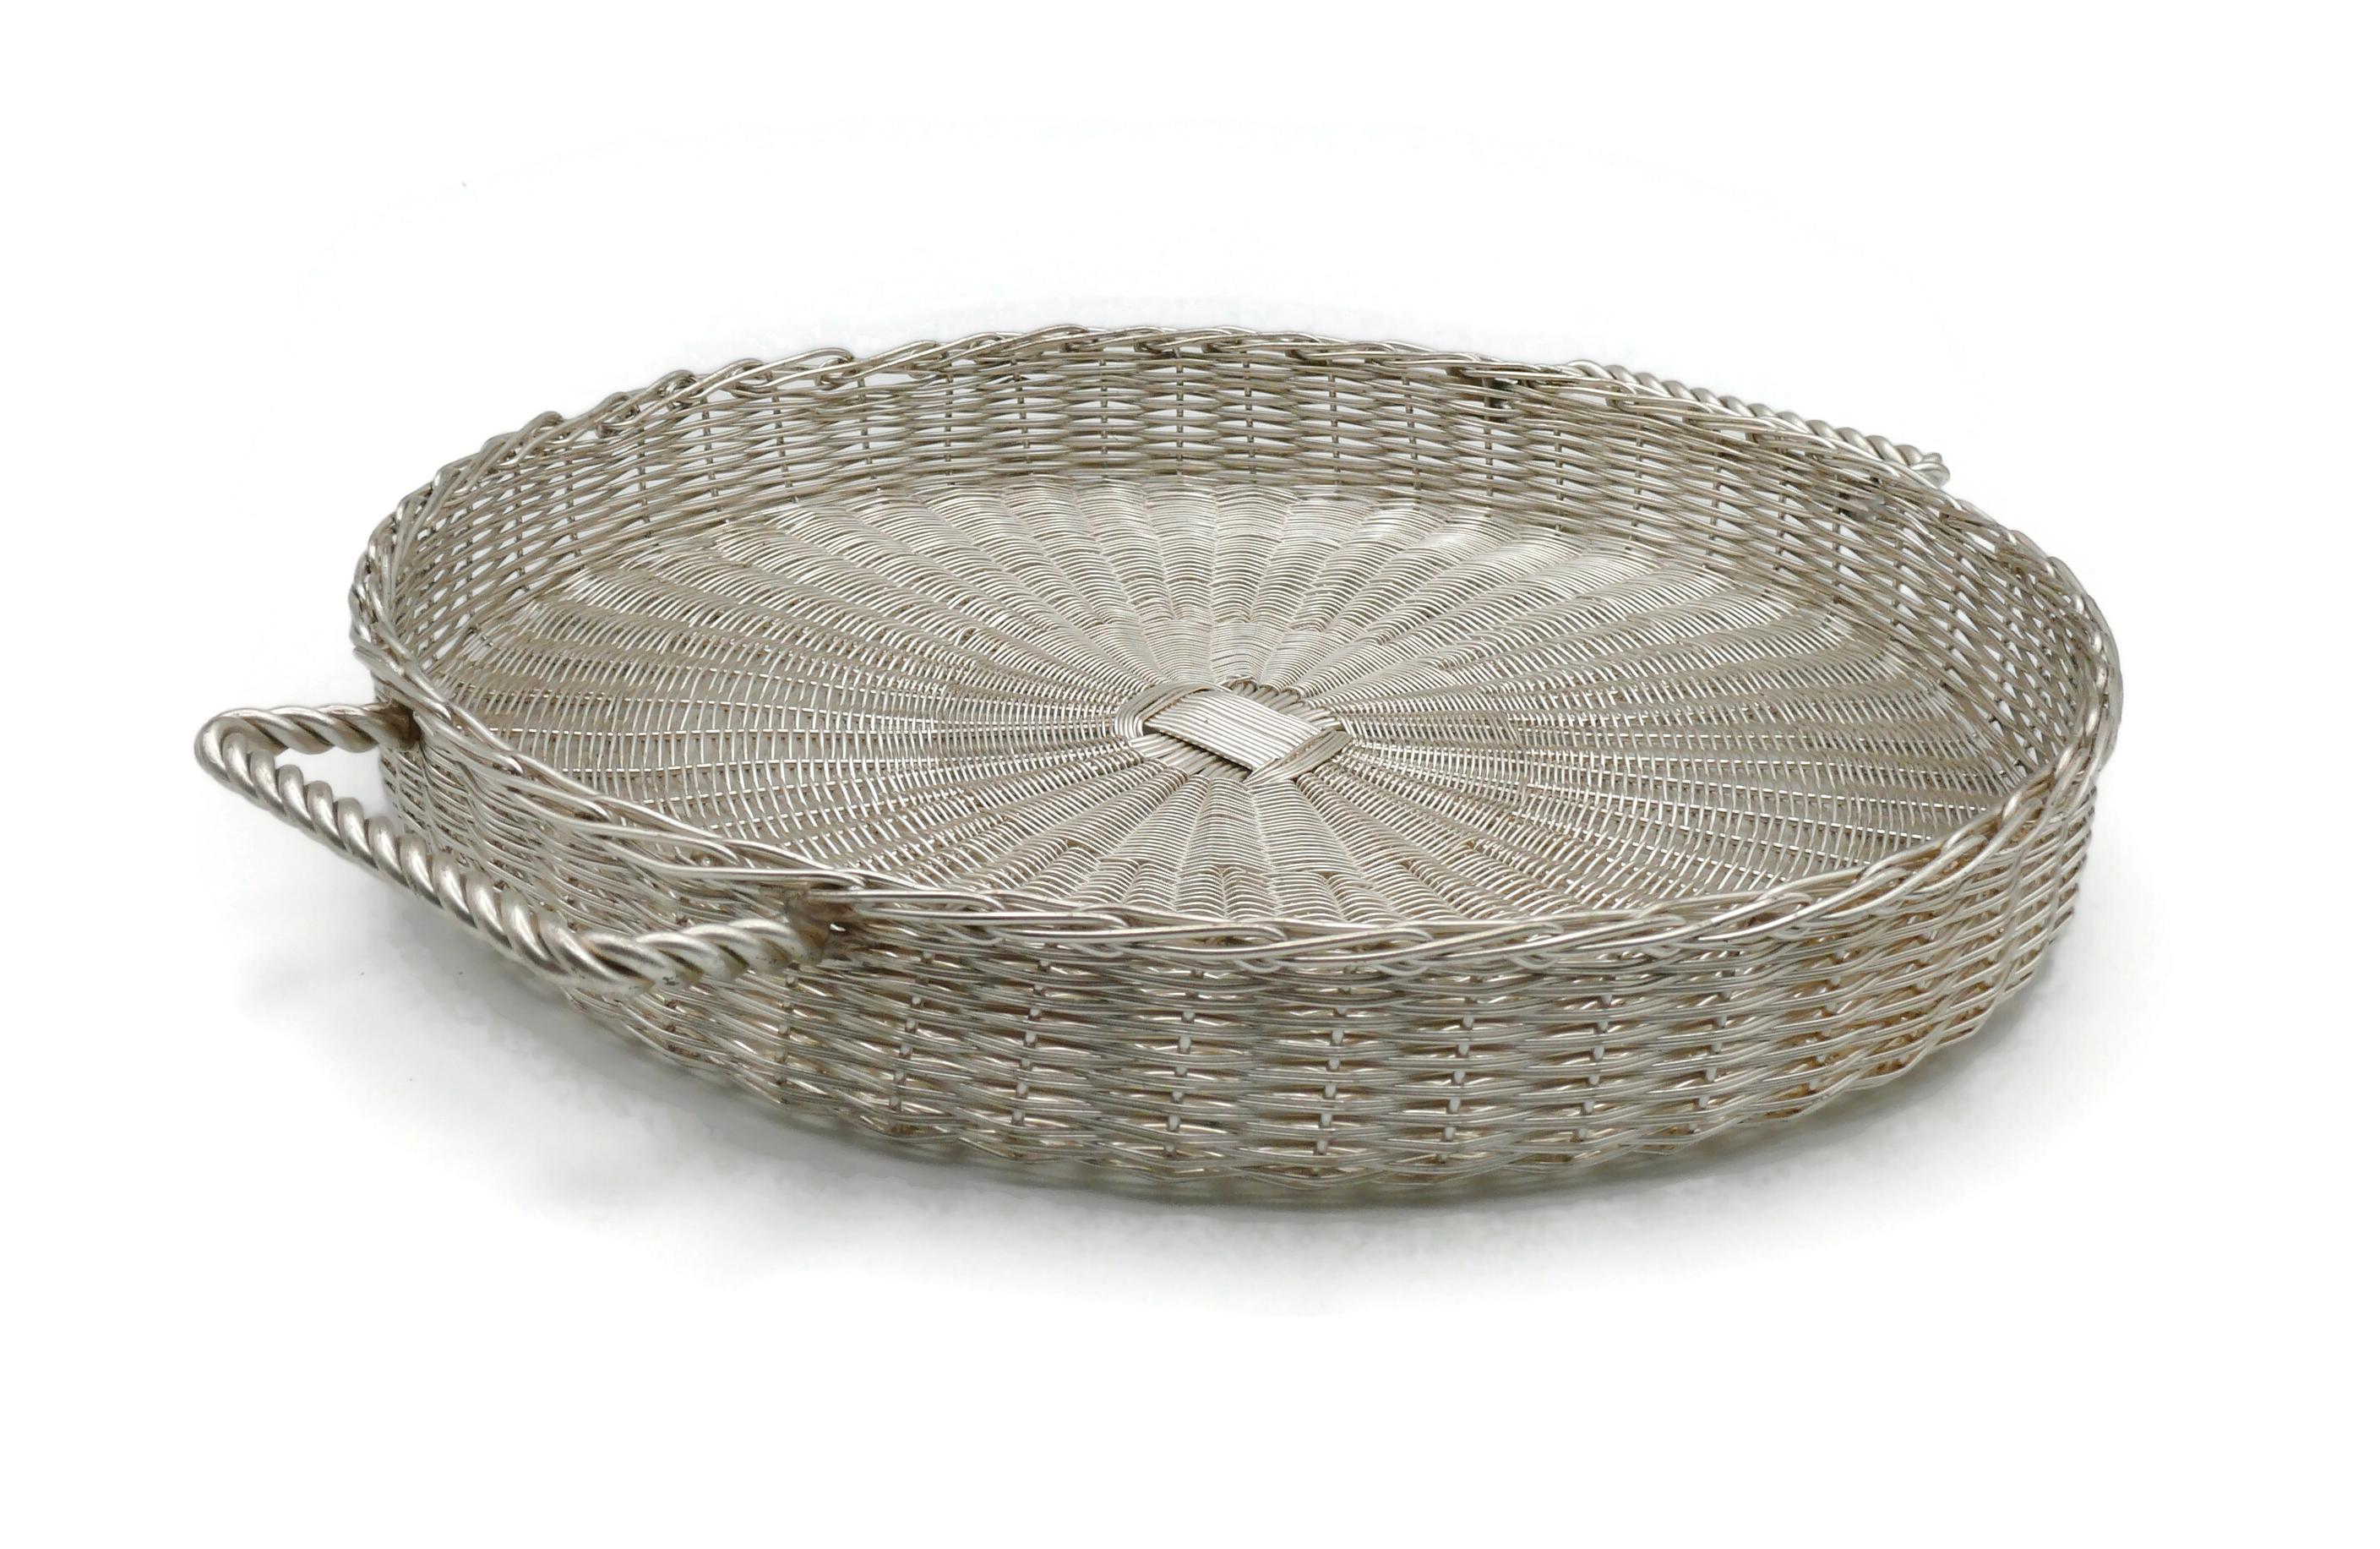 CHRISTIAN DIOR Home Collection Vintage Silver Plated Wicker Style Basket 1